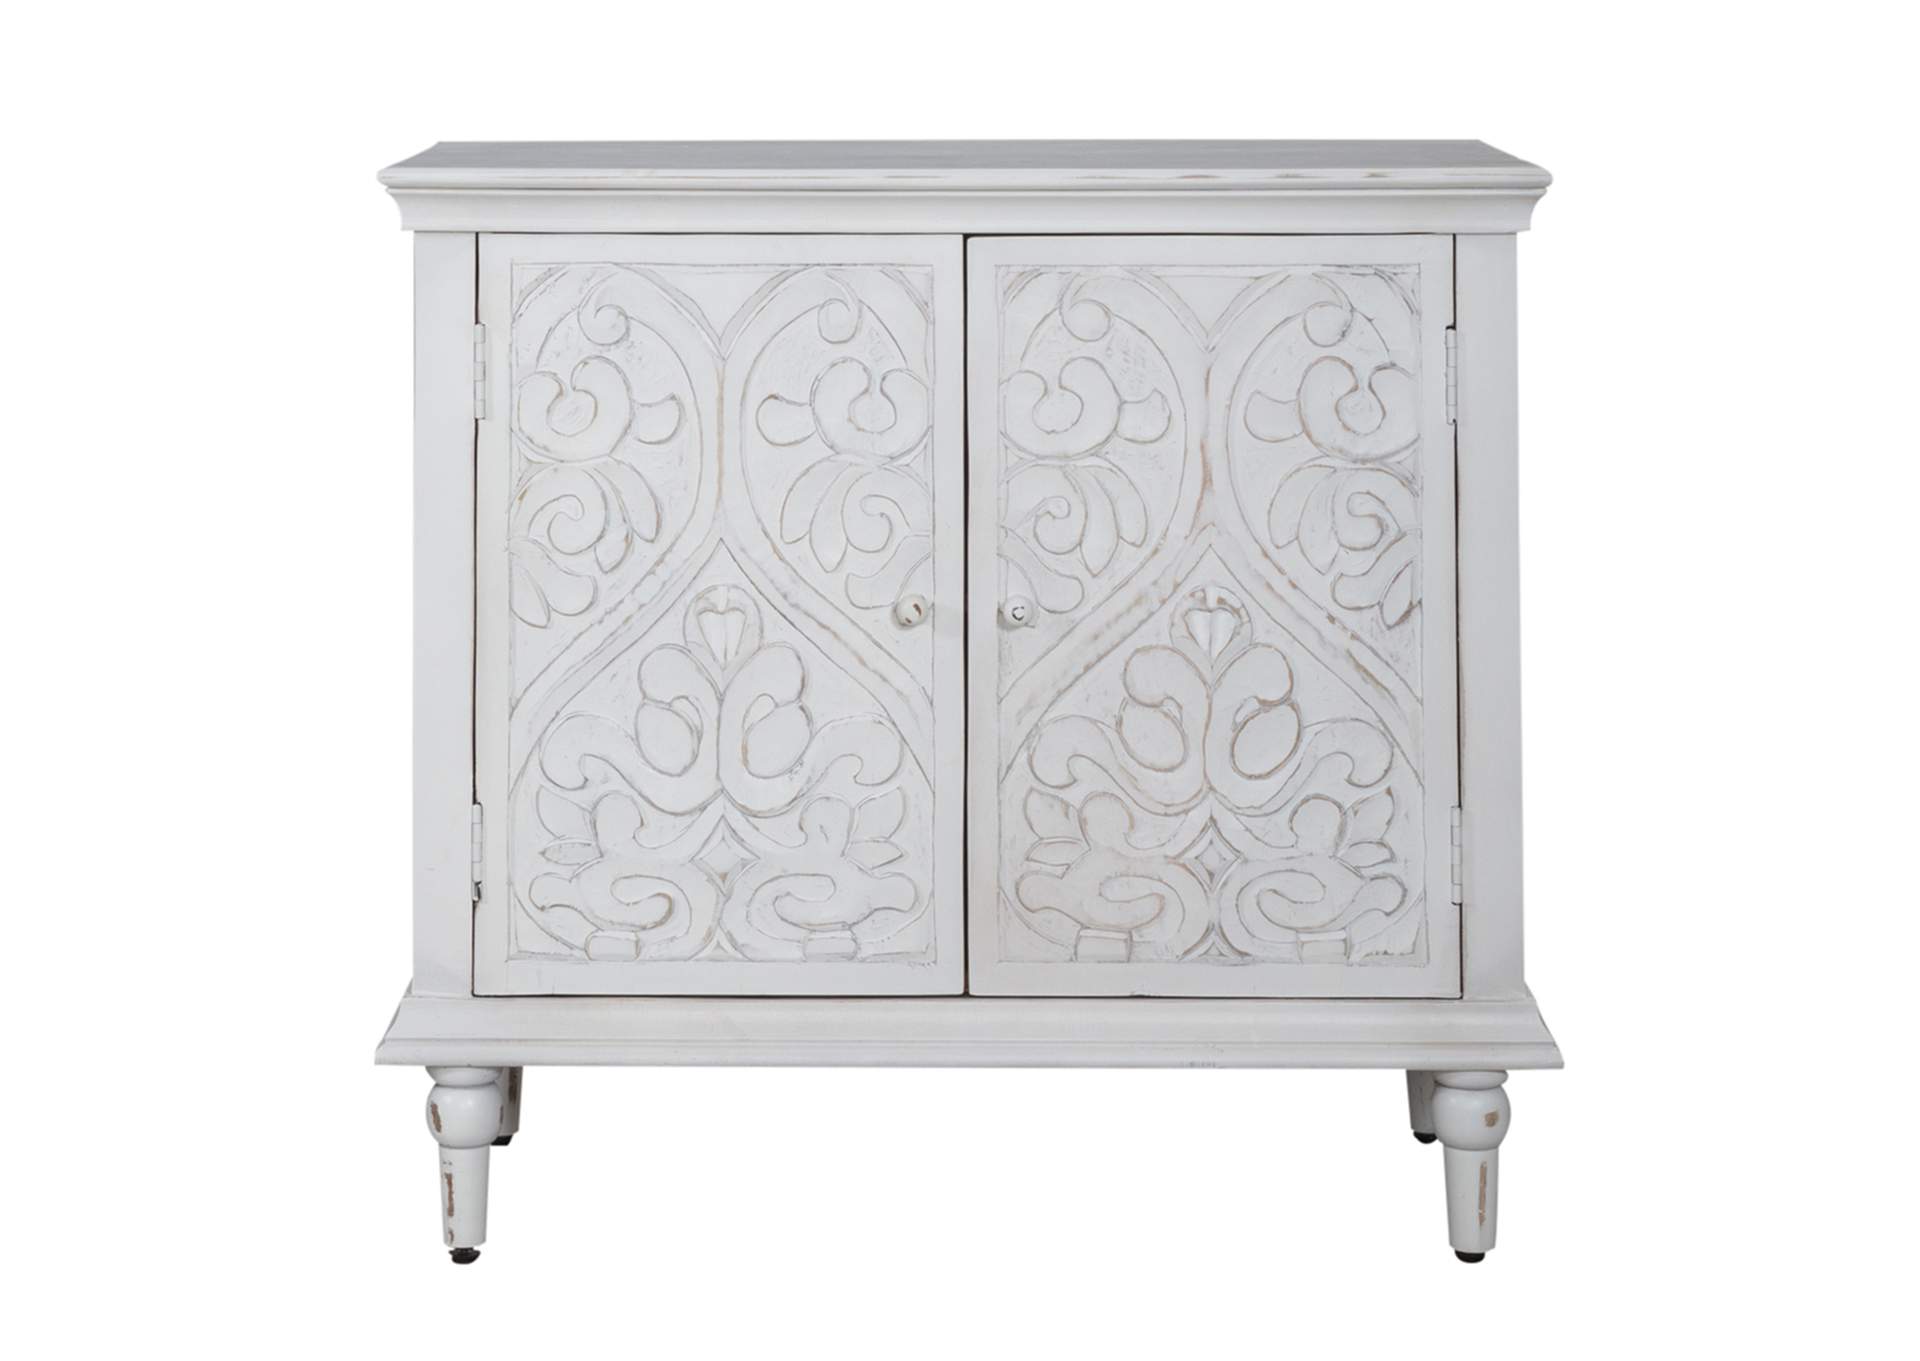 French Quarter 2 Door Accent Cabinet,Liberty